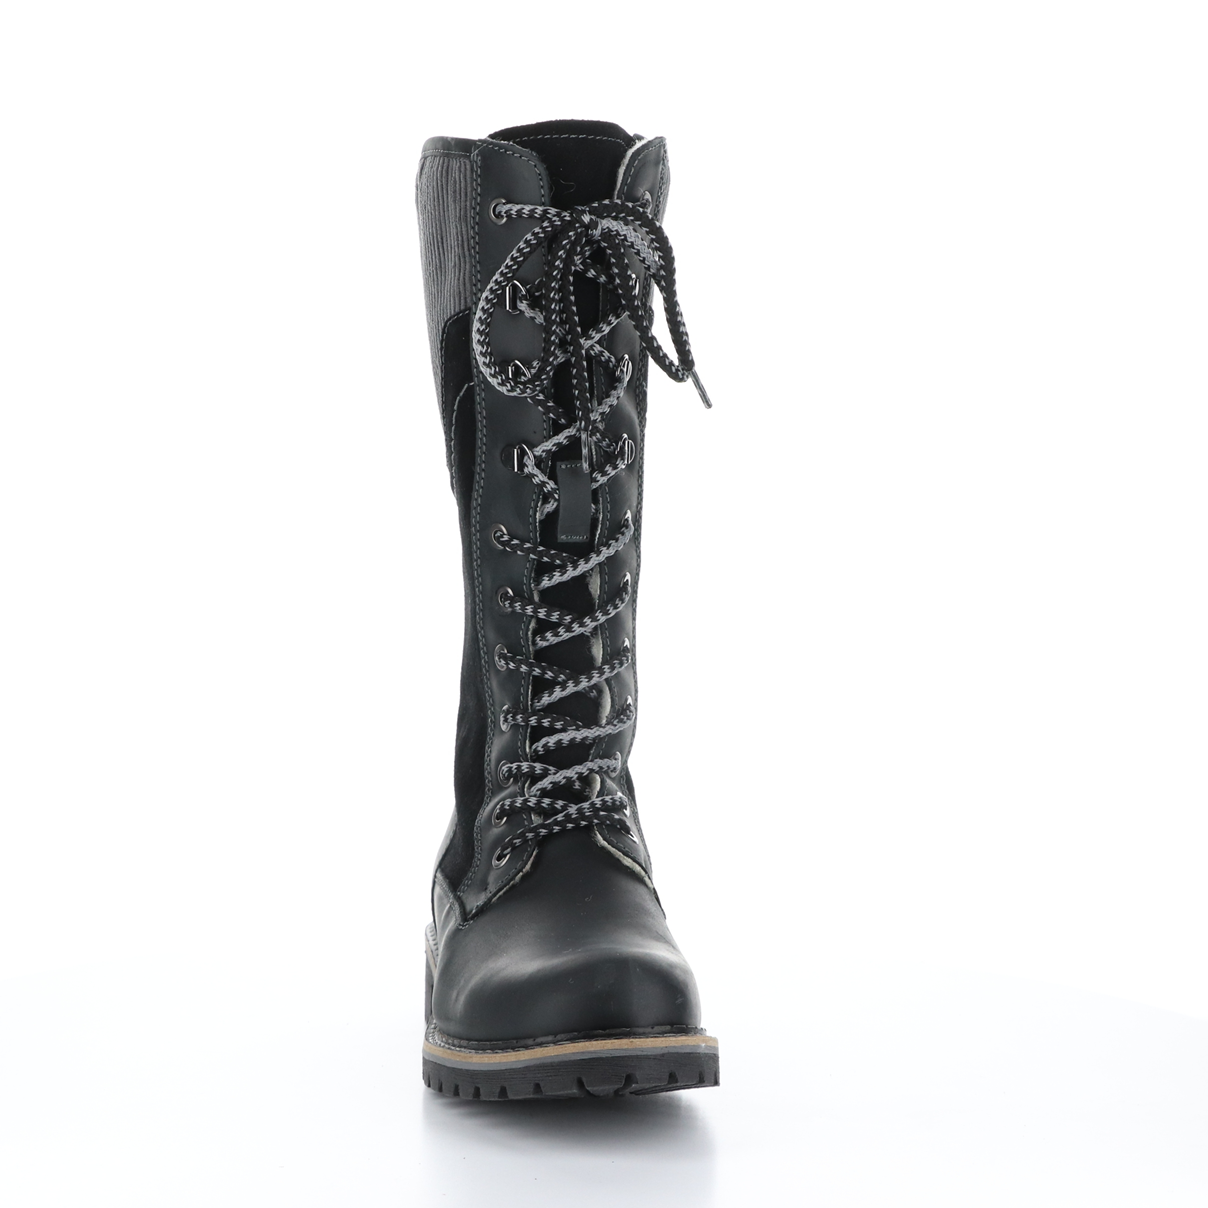 Front view of the bos & co harrsion boot in the color black/grey. This boot is calf-height. It has a lace up front and panels of suede leather, burnished leather, and corduroy. 